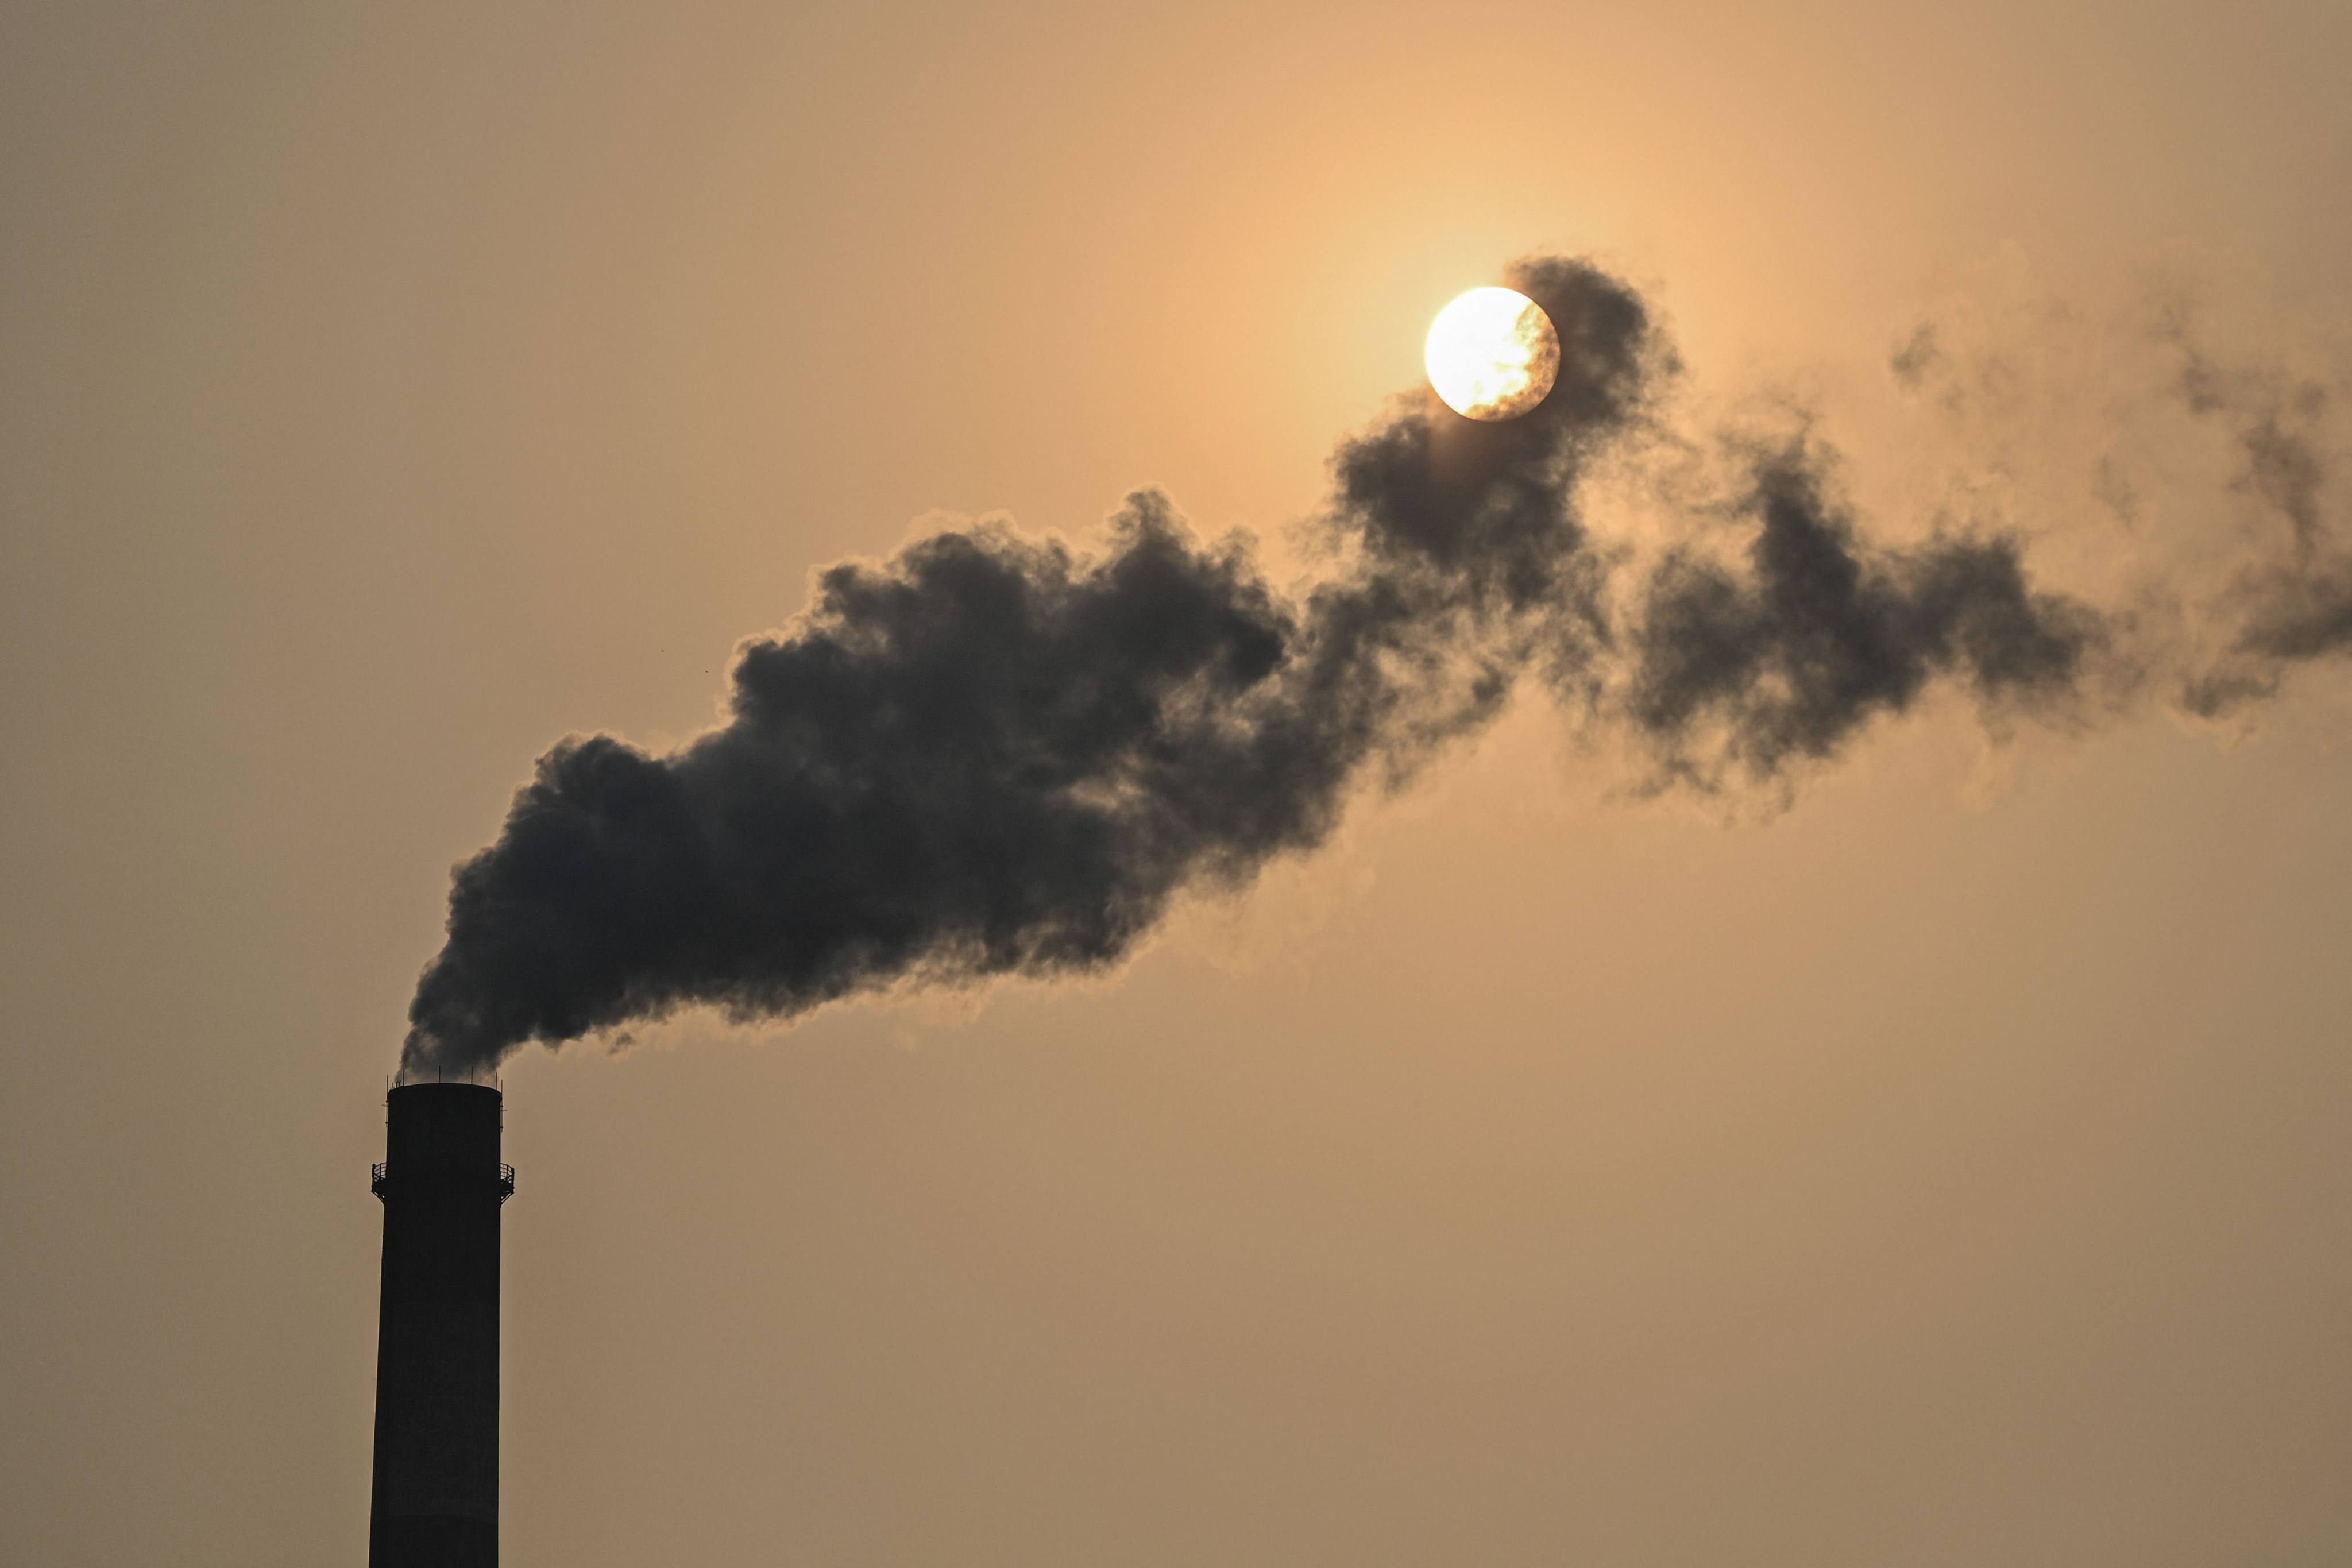 Beijing’s clean air policies have led to a decrease in pollutant emissions from the burning of fossil fuels in power plants and factories over the last decade, including aerosols such as black carbon, or soot. Photo: AFP